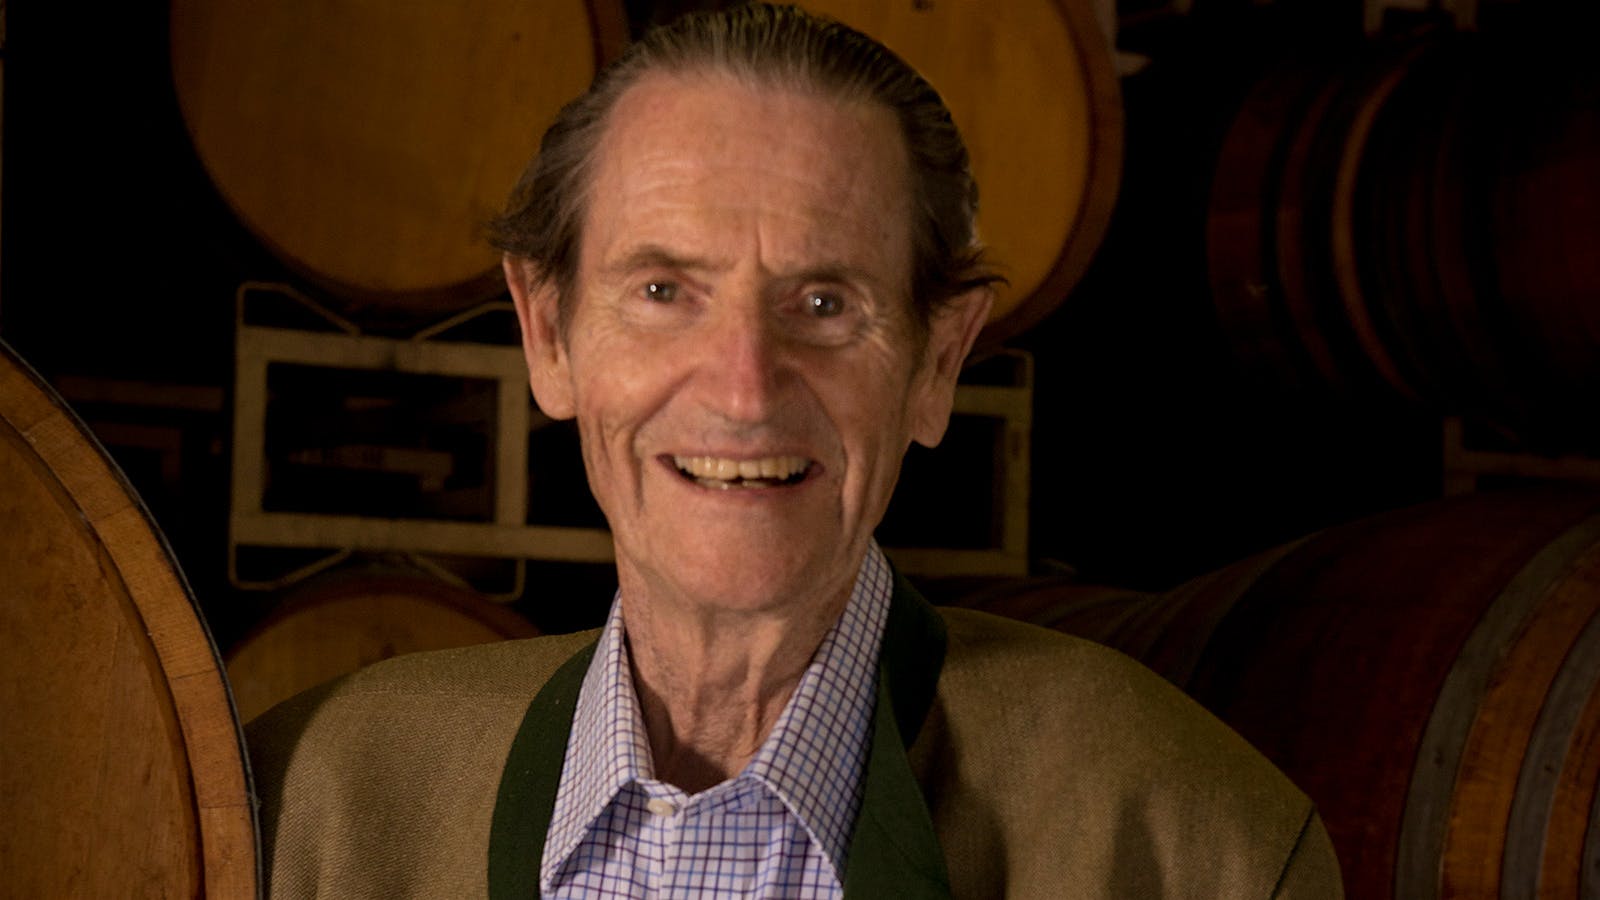 Nicolaus Hahn, Founder of Hahn Family Wines, Dies at 81